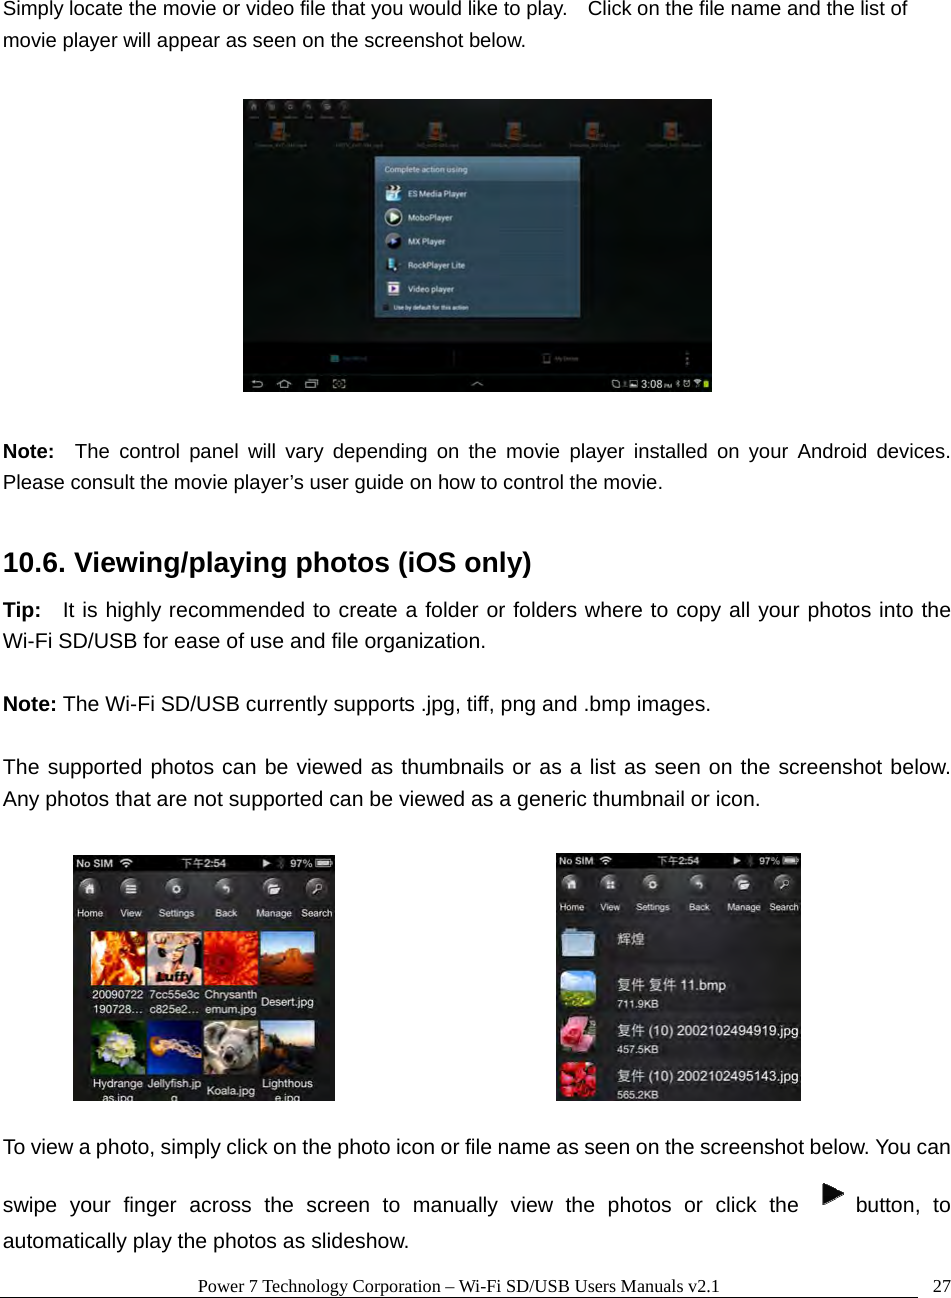 Power 7 Technology Corporation – Wi-Fi SD/USB Users Manuals v2.1  27 Simply locate the movie or video file that you would like to play.    Click on the file name and the list of movie player will appear as seen on the screenshot below.    Note:  The control panel will vary depending on the movie player installed on your Android devices.  Please consult the movie player’s user guide on how to control the movie.  10.6. Viewing/playing photos (iOS only) Tip:  It is highly recommended to create a folder or folders where to copy all your photos into the Wi-Fi SD/USB for ease of use and file organization.  Note: The Wi-Fi SD/USB currently supports .jpg, tiff, png and .bmp images.    The supported photos can be viewed as thumbnails or as a list as seen on the screenshot below.  Any photos that are not supported can be viewed as a generic thumbnail or icon.           To view a photo, simply click on the photo icon or file name as seen on the screenshot below. You can swipe your finger across the screen to manually view the photos or click the  button, to automatically play the photos as slideshow.   